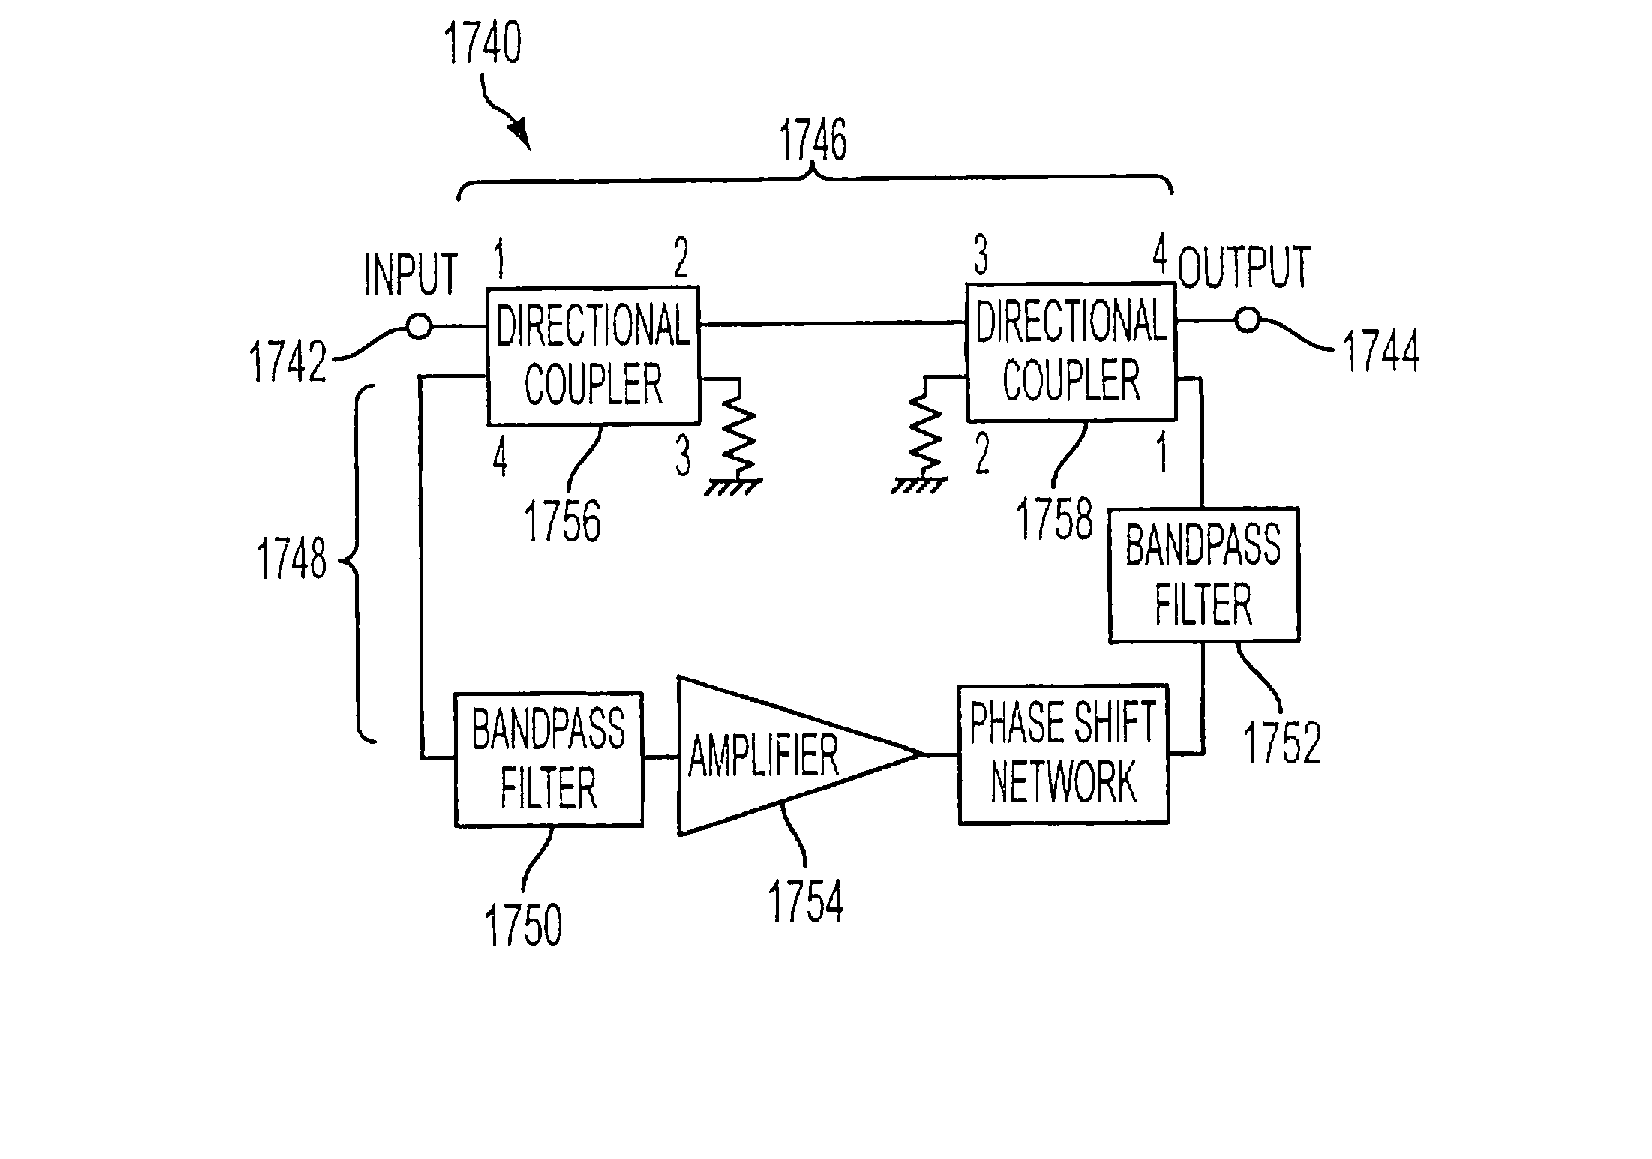 Narrow-band absorptive bandstop filter with multiple signal paths